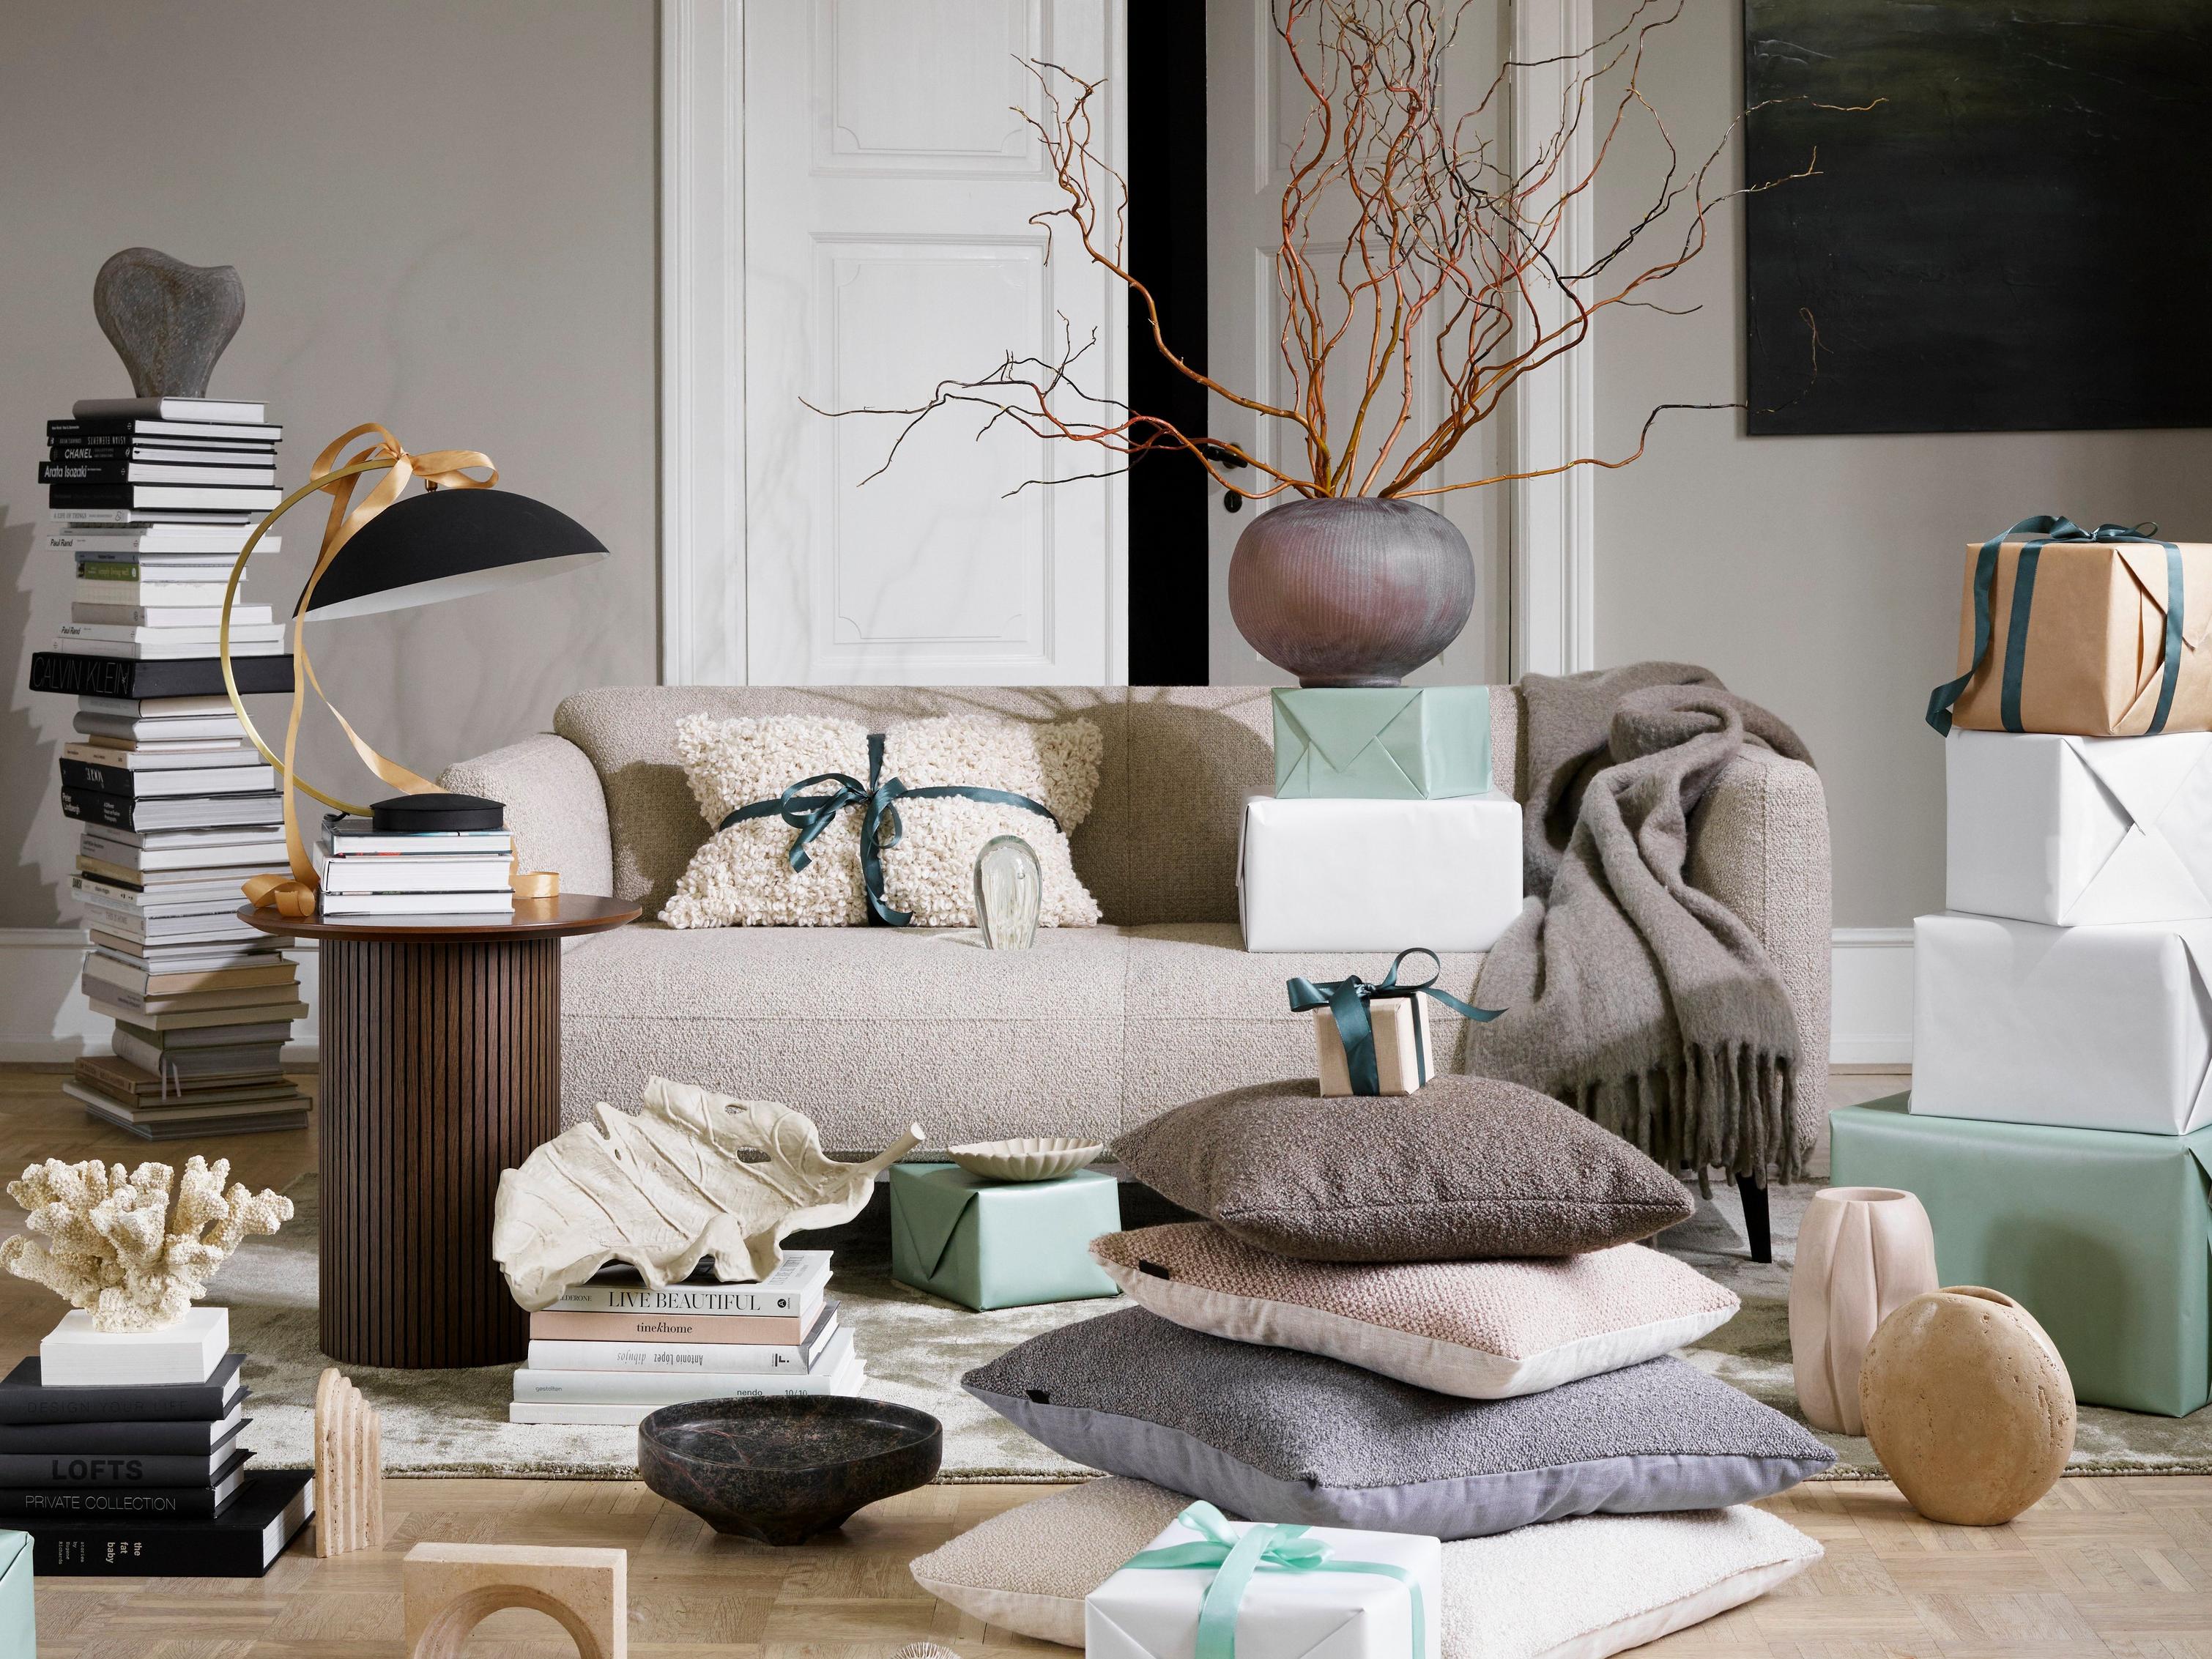 Light and airy living room filled with gifts